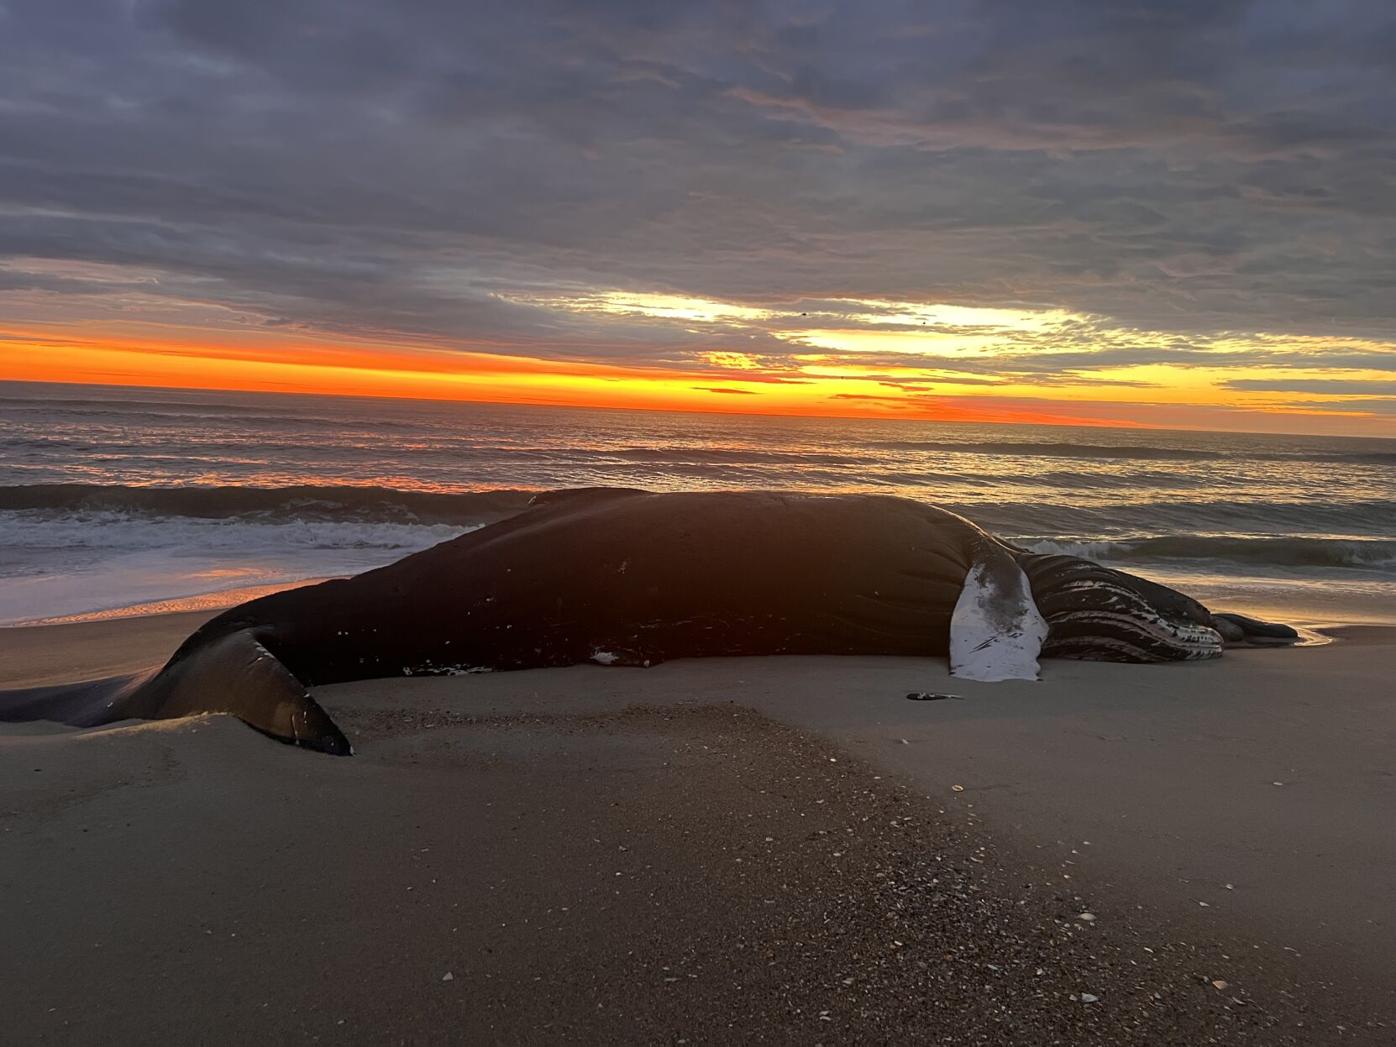 Humpback whale found dead, stranded on Maryland coast